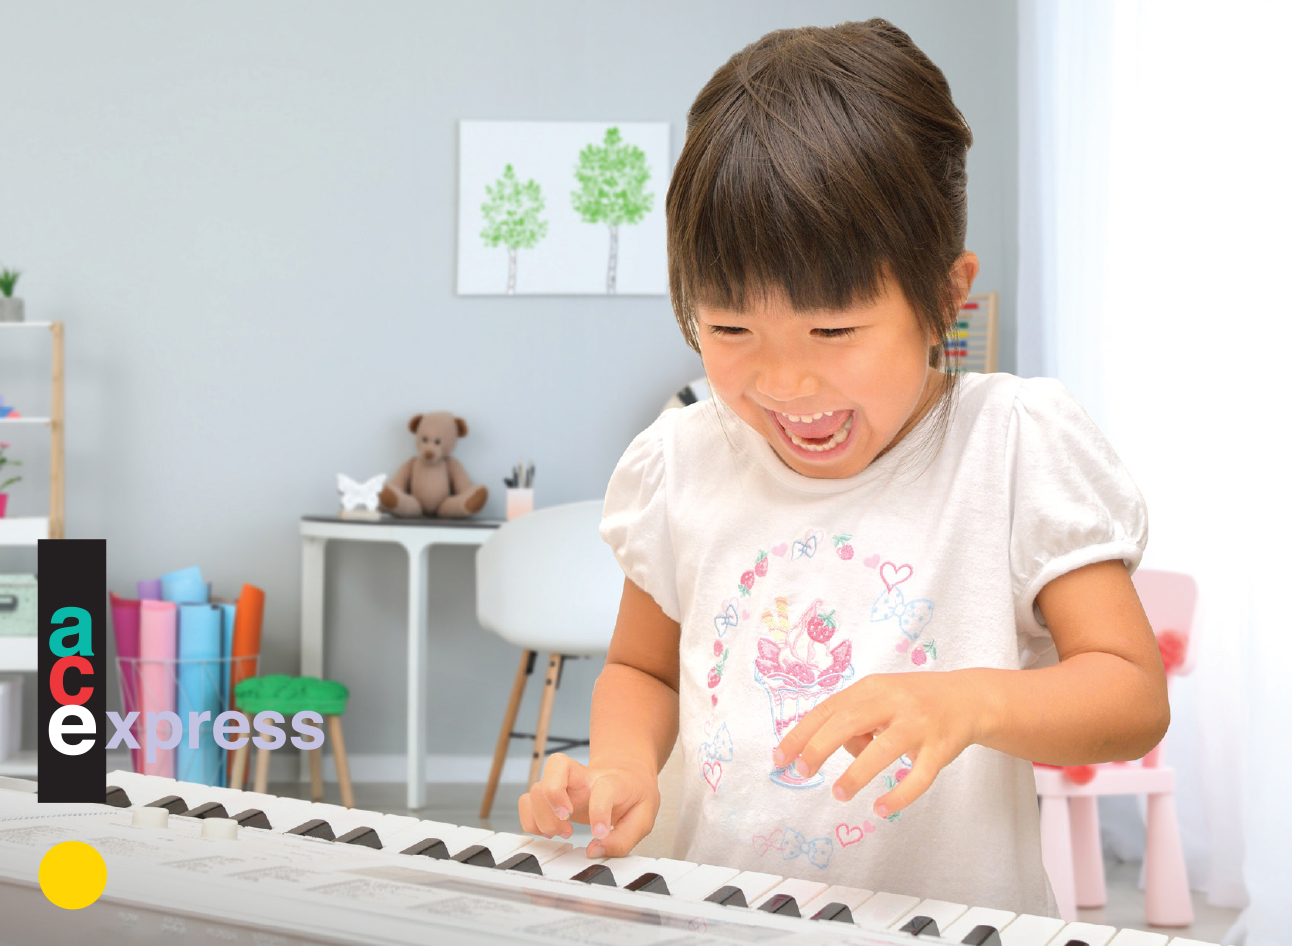 Calaméo - How to Teach Piano to Young Children Using Games